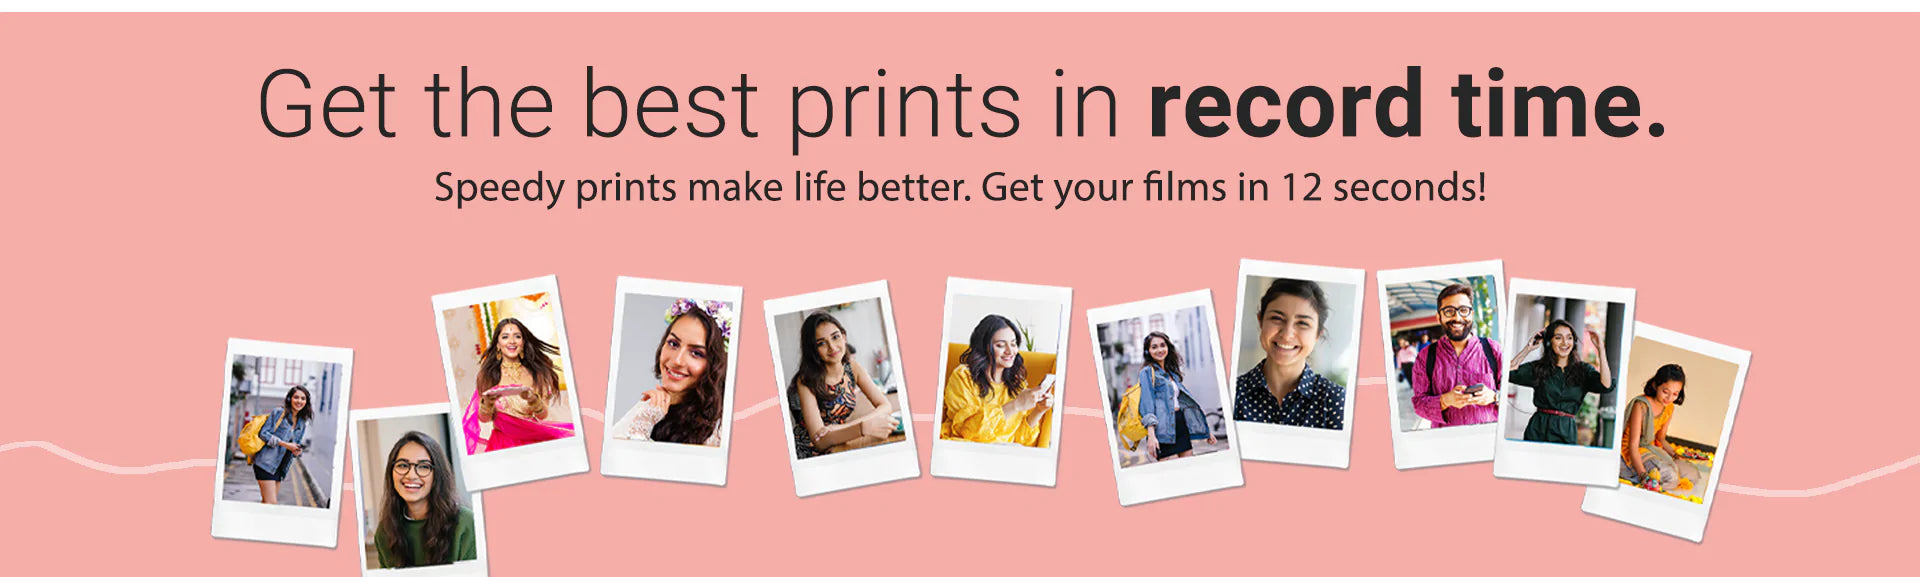 Instax Mini LiPlay - Print Images in 12 seconds